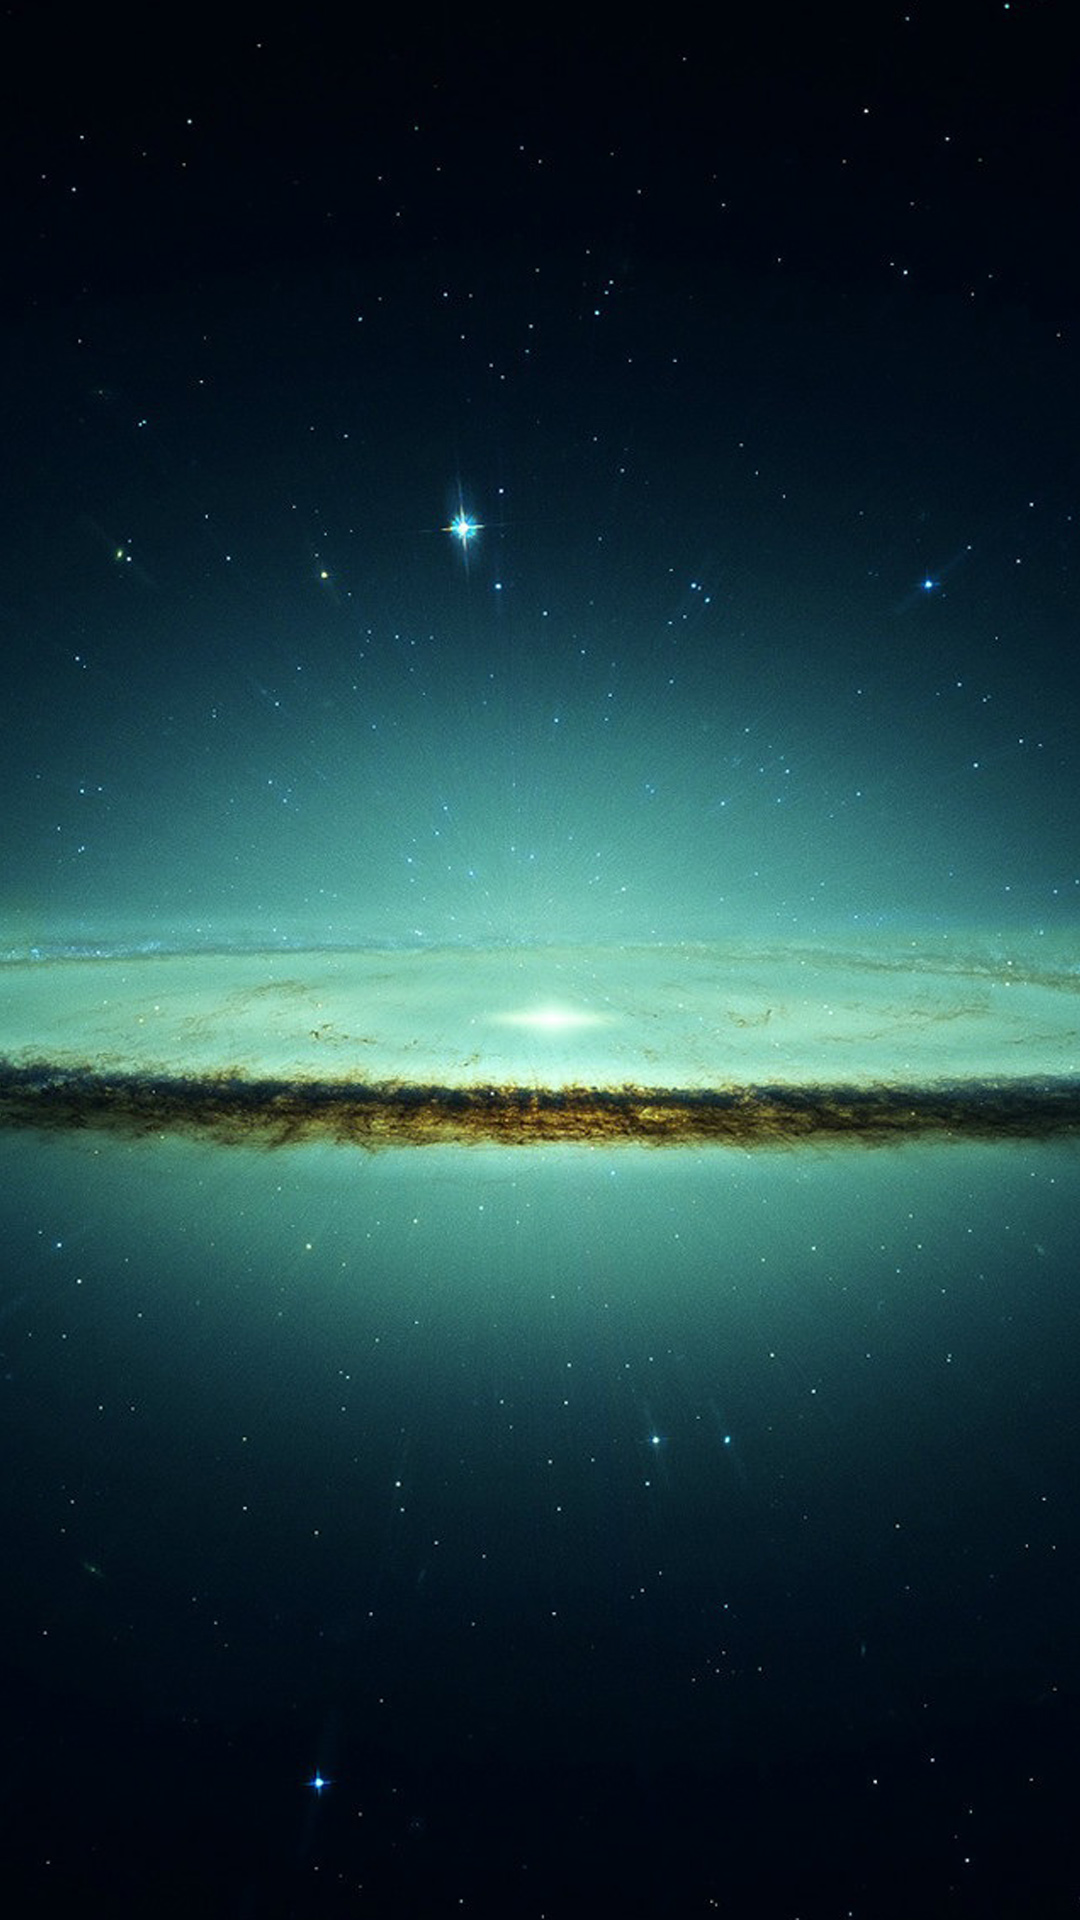 Space Galaxy S5 Wallpapers 52 Samsung Galaxy S5 Wallpapers Hd Iphone6plus 壁紙 待受画像ギャラリー